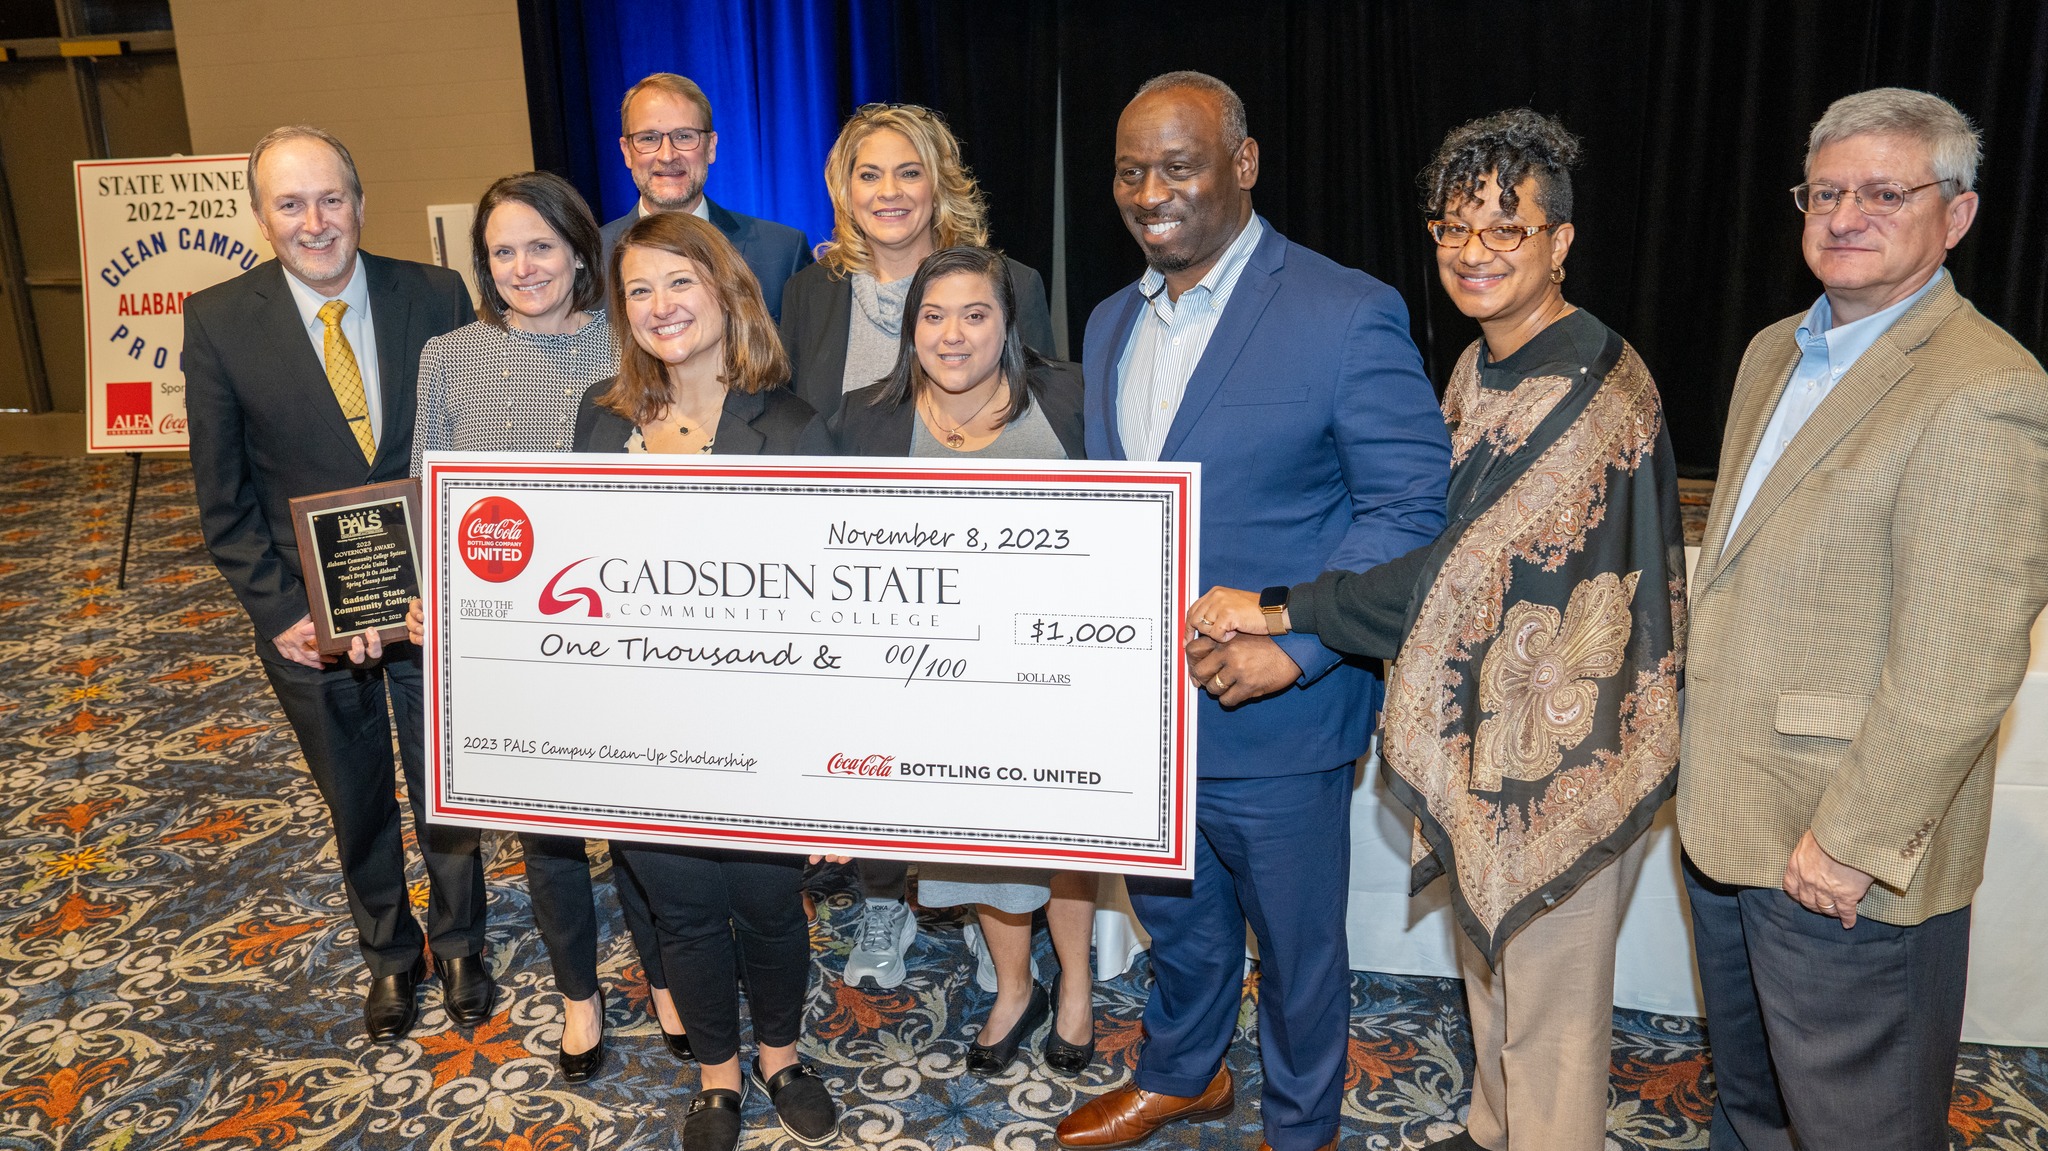 Gadsden State received the $1,000 prize during an awards luncheon at the Renaissance Hotel in Montgomery.